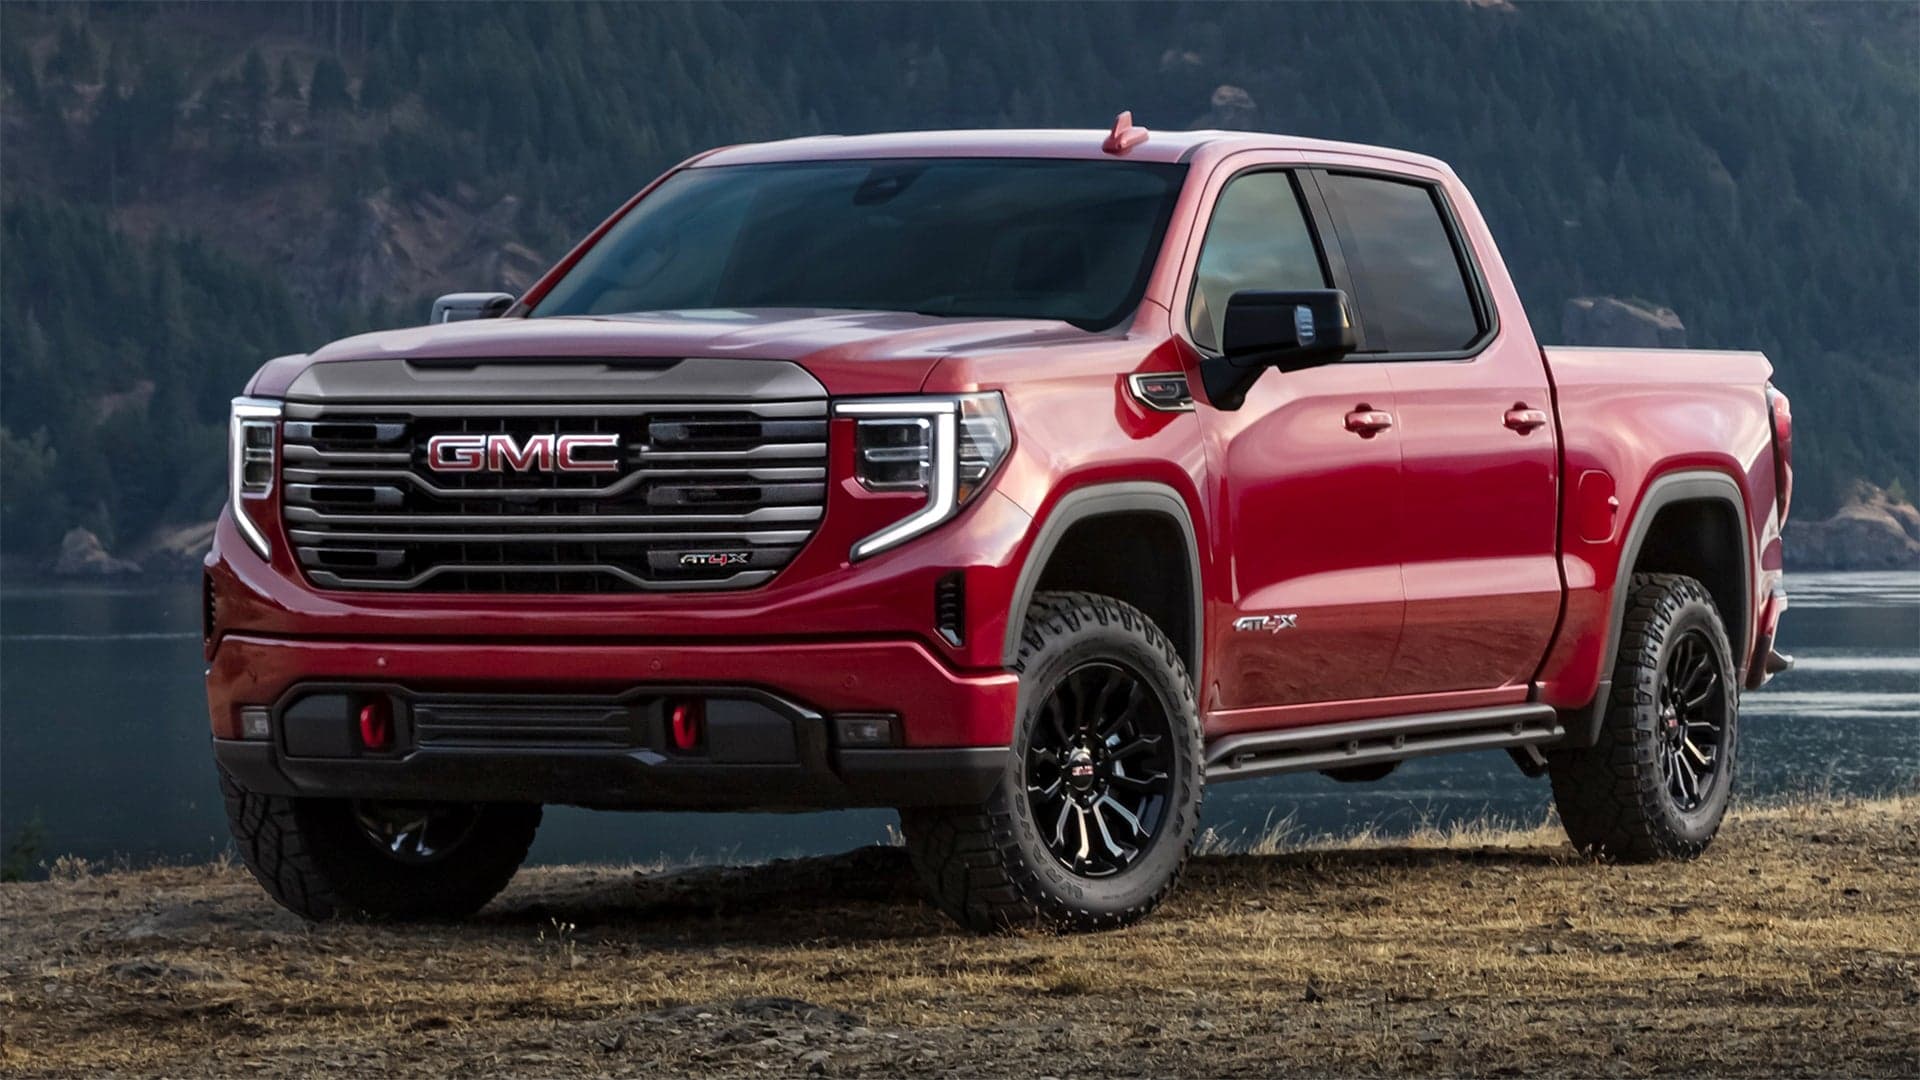 2022 GMC Sierra Updates: Super Cruise, New Trims and a Fresh Interior at Last